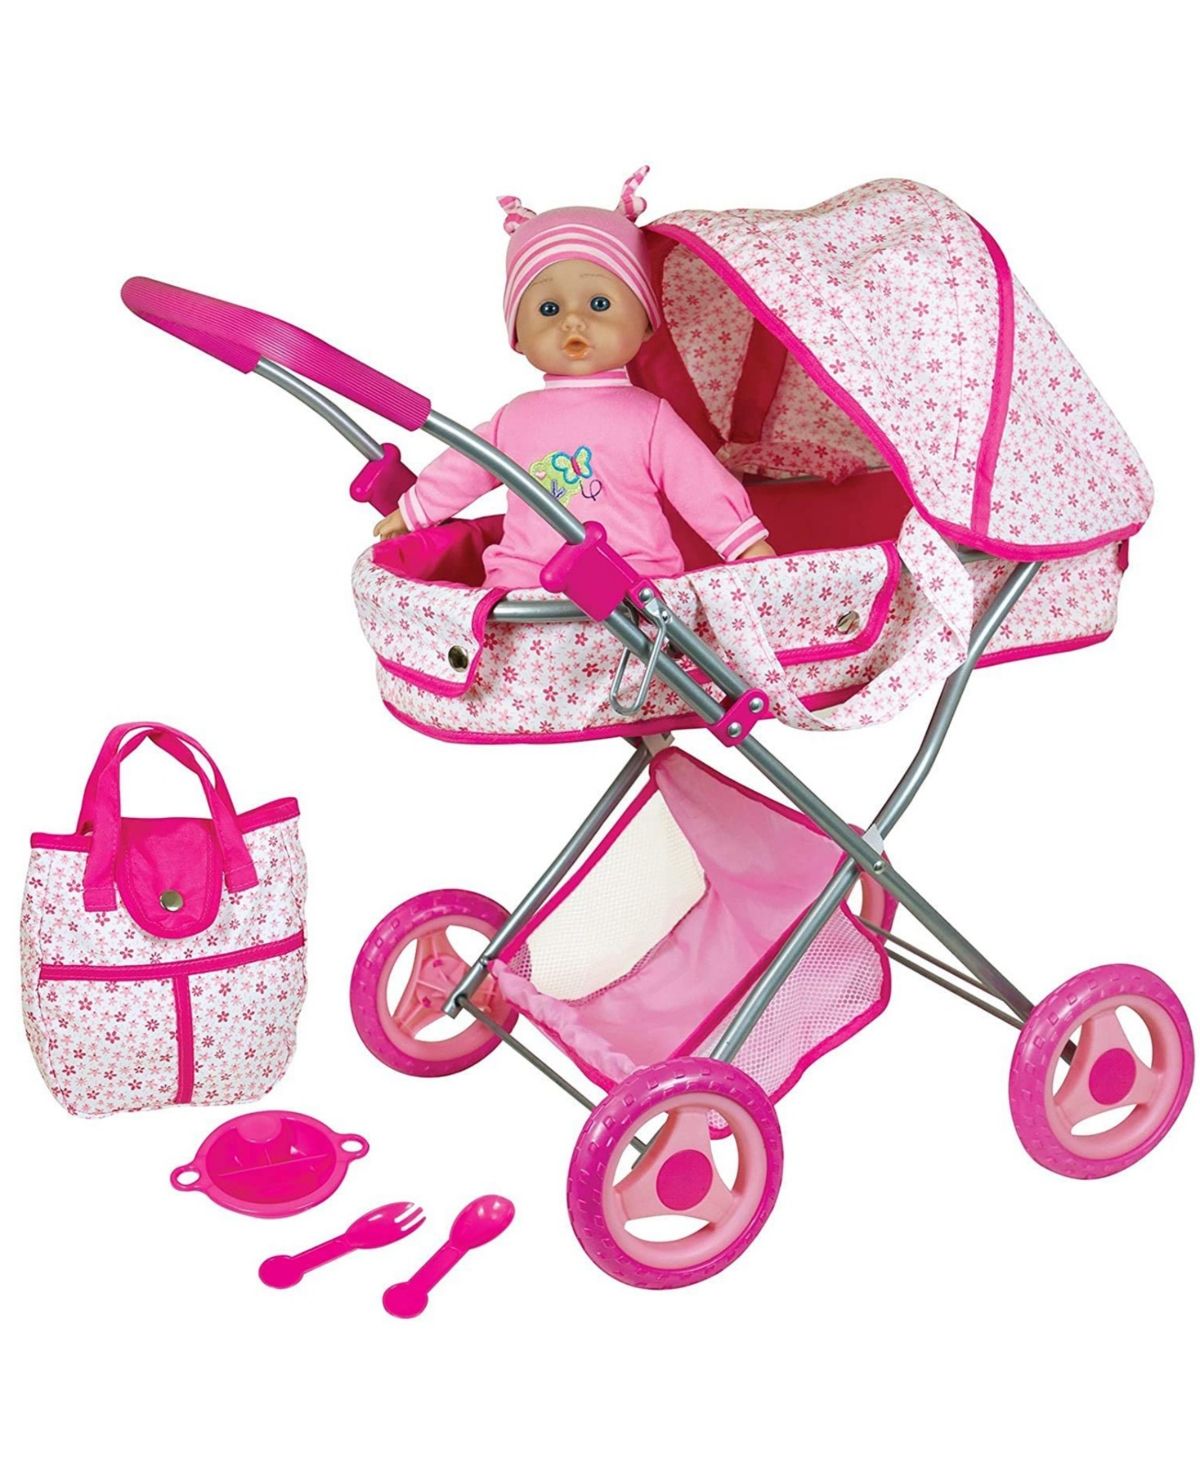 Lissi Dolls Pram With 13" Baby Doll And Accessories In Multi